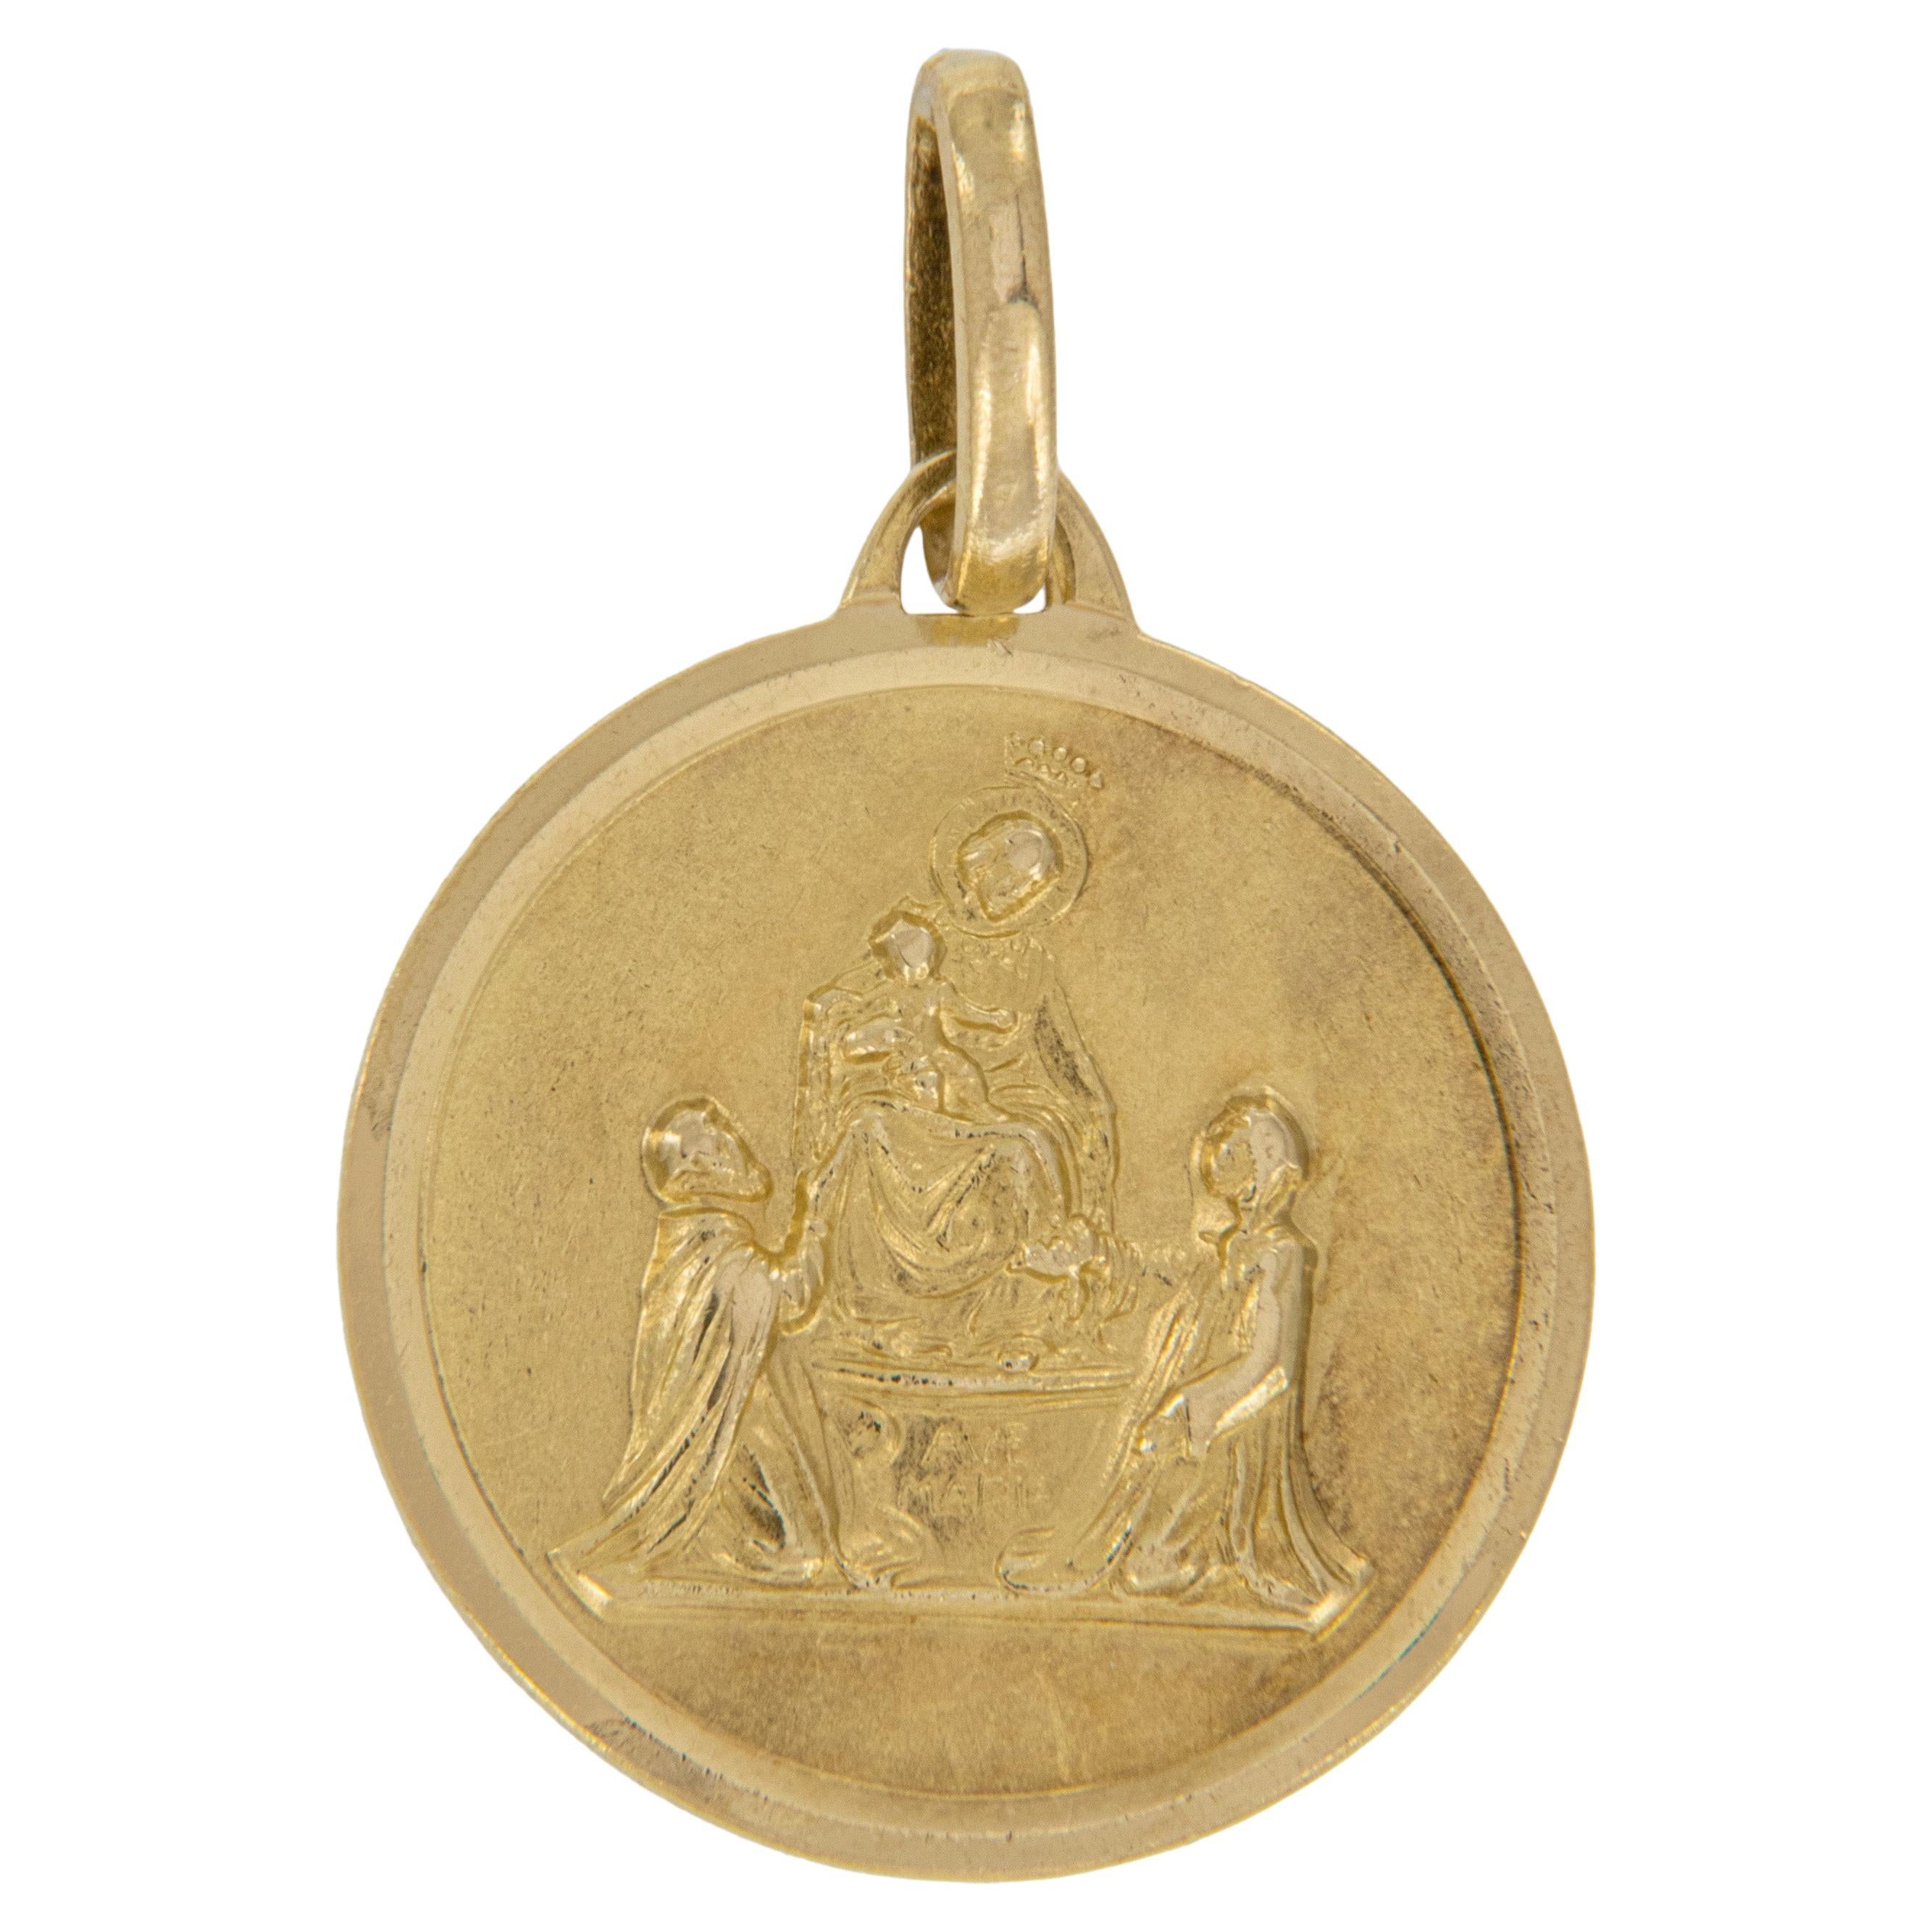 Beautiful vintage Ava Maria medal in classic 18 karat yellow gold, round shape with textured finish and bright edging. They don't them like this anymore, sturdy to last for generations. Looks lovely on a chain to wear close to your heart or on a